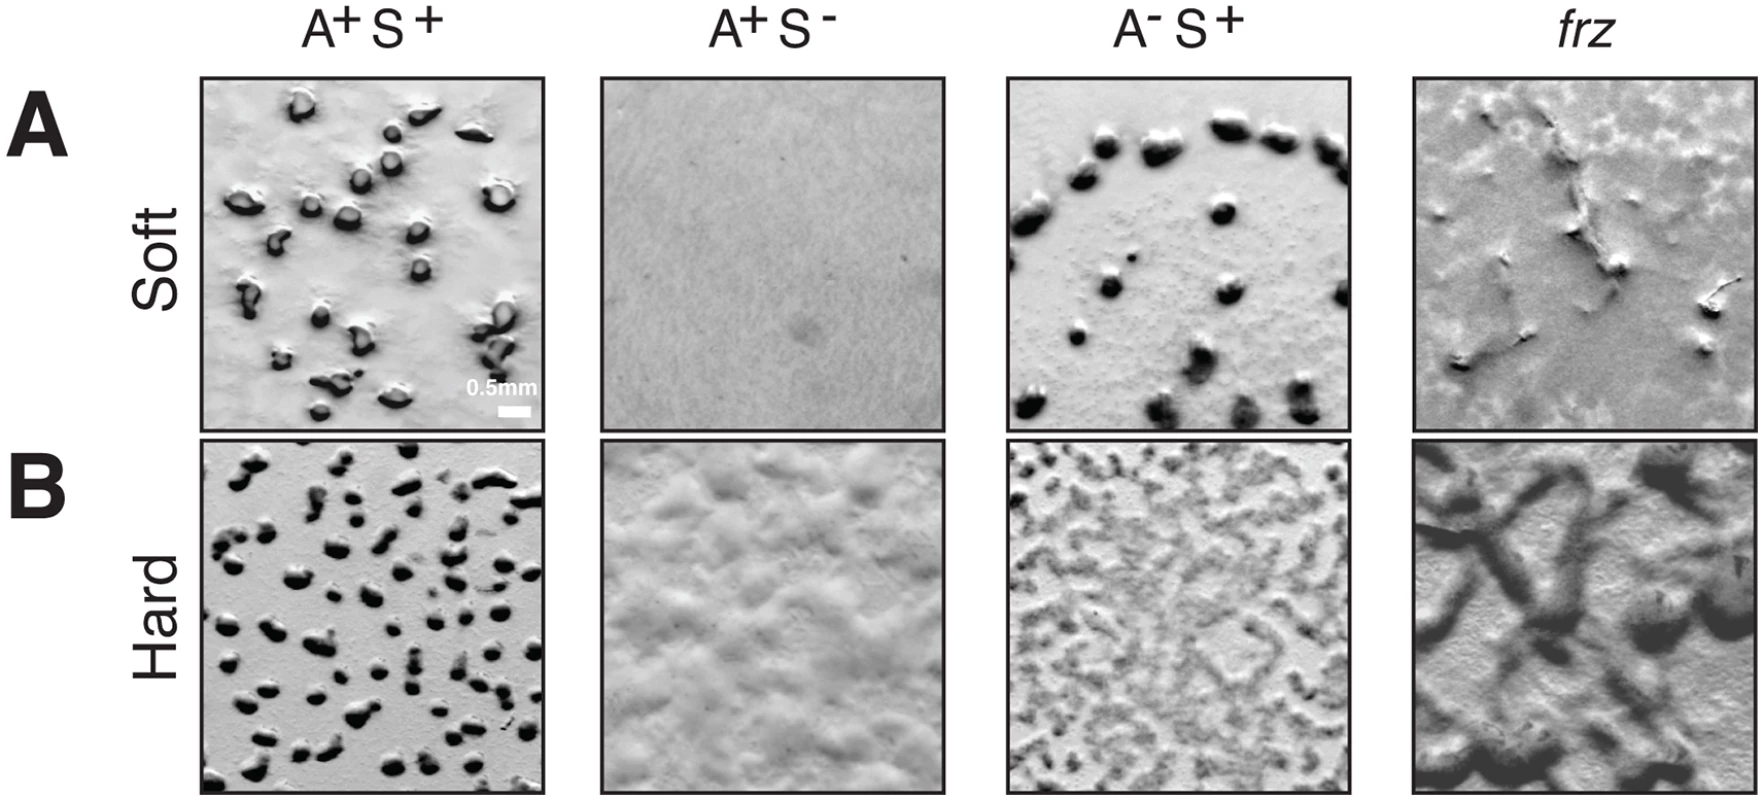 A- and S-motility diversify the repertoire of <i>Myxococcus</i> multicellular behaviors.